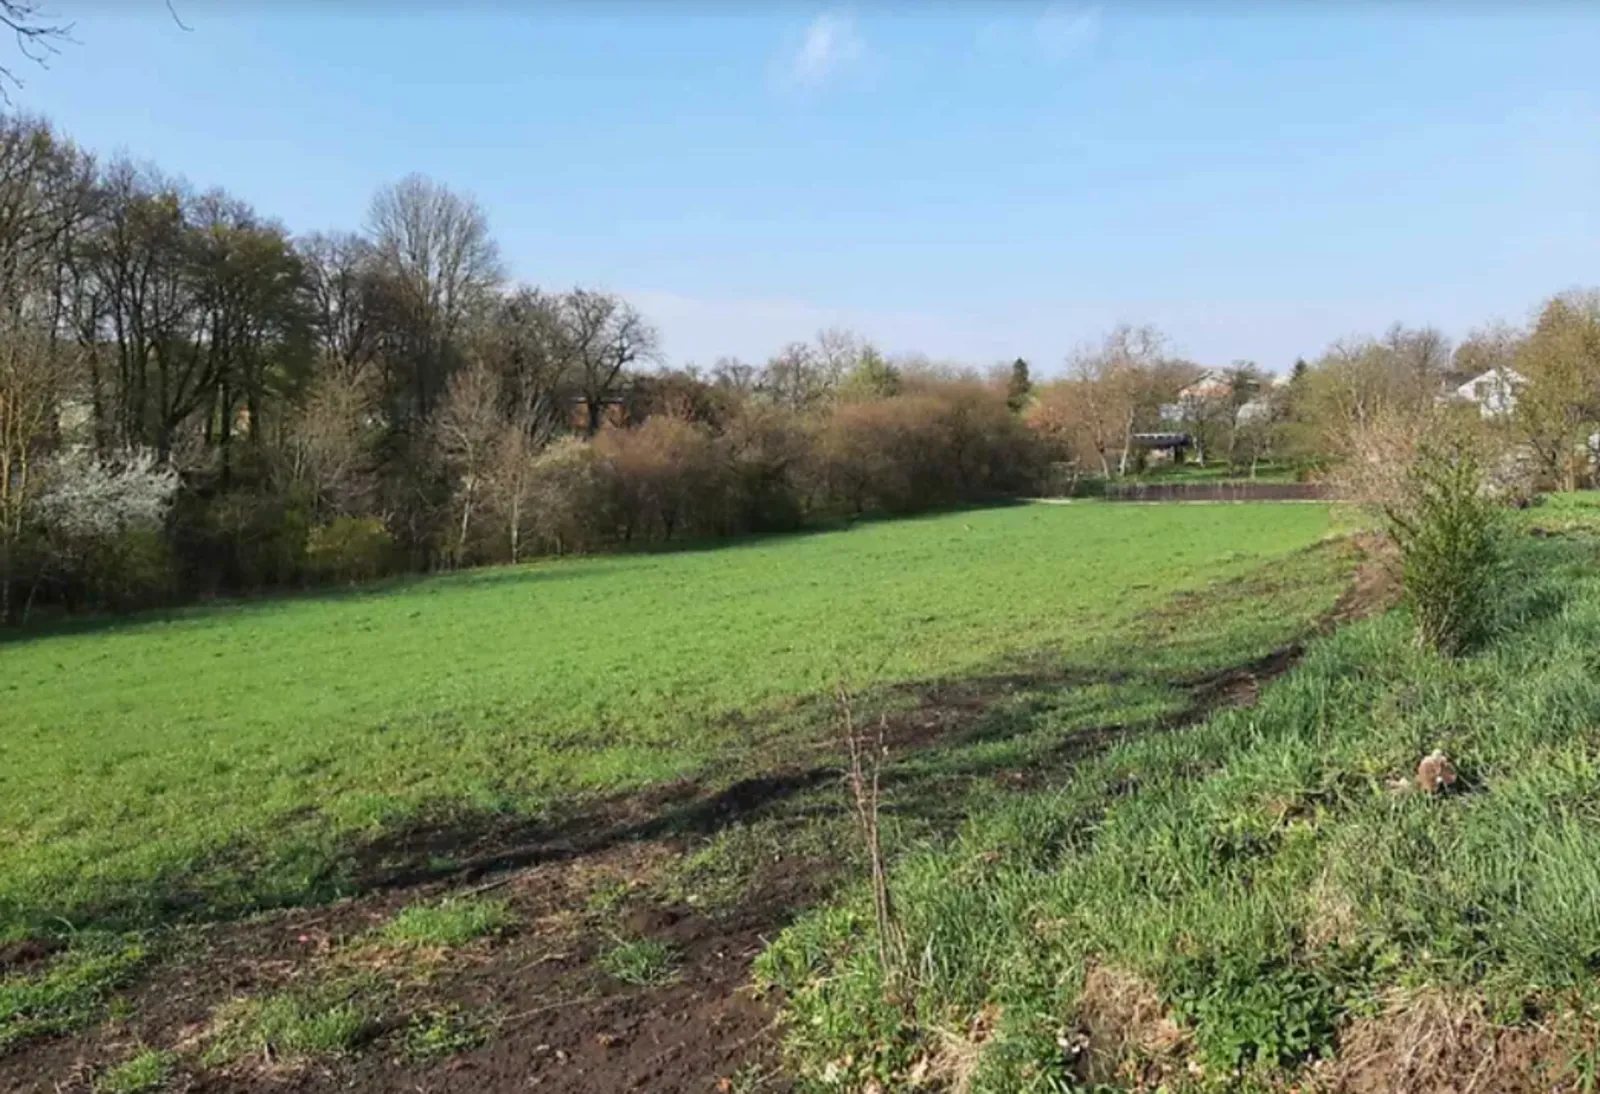 Land for sale for residential construction. Velykye Hay. 